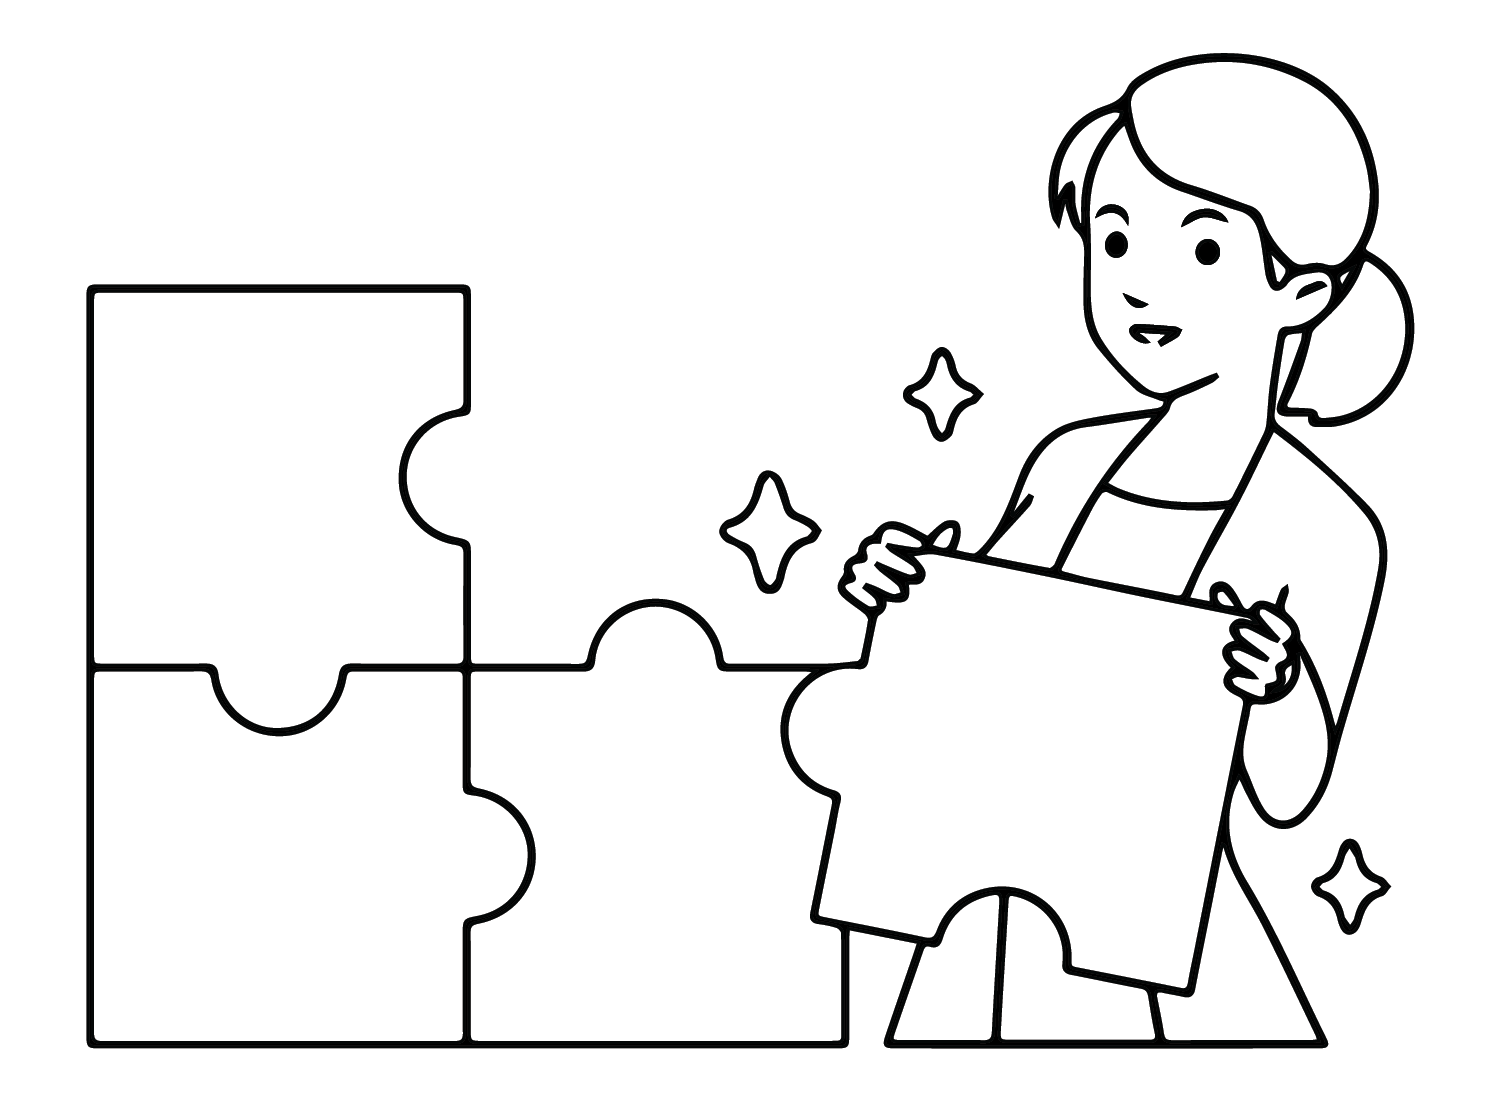 The Girl Jigsaw Puzzle Coloring Page